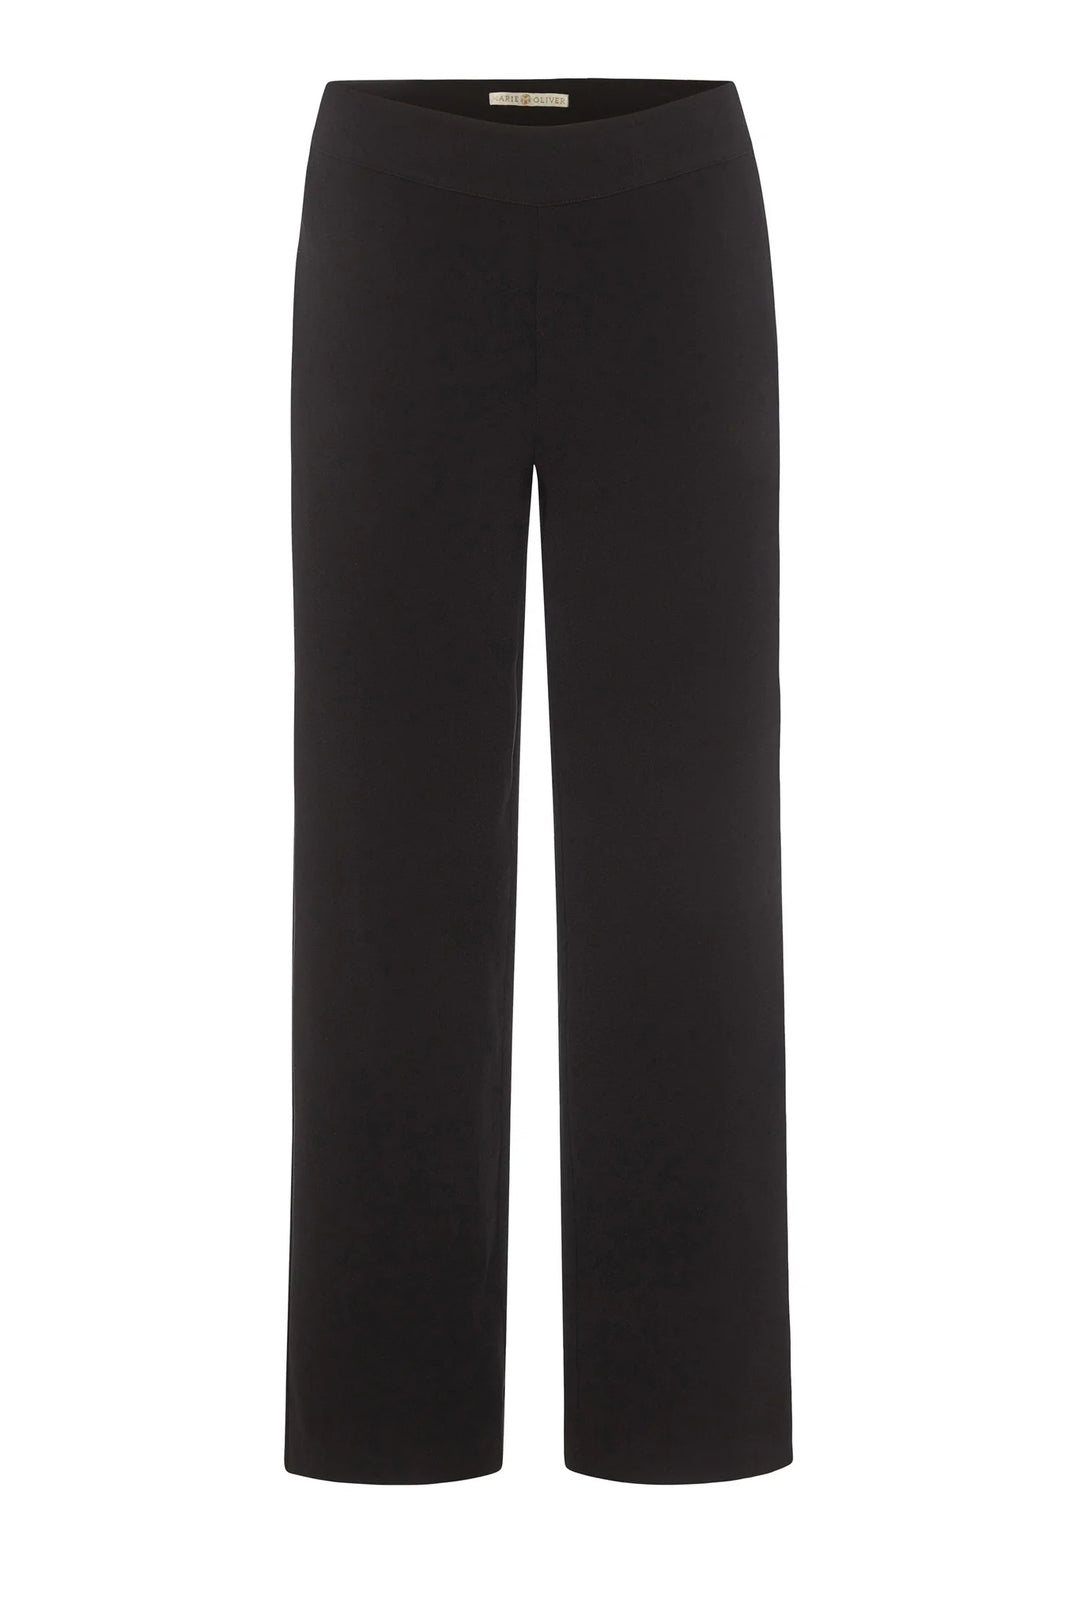 Marie Oliver Mia Straight Pant